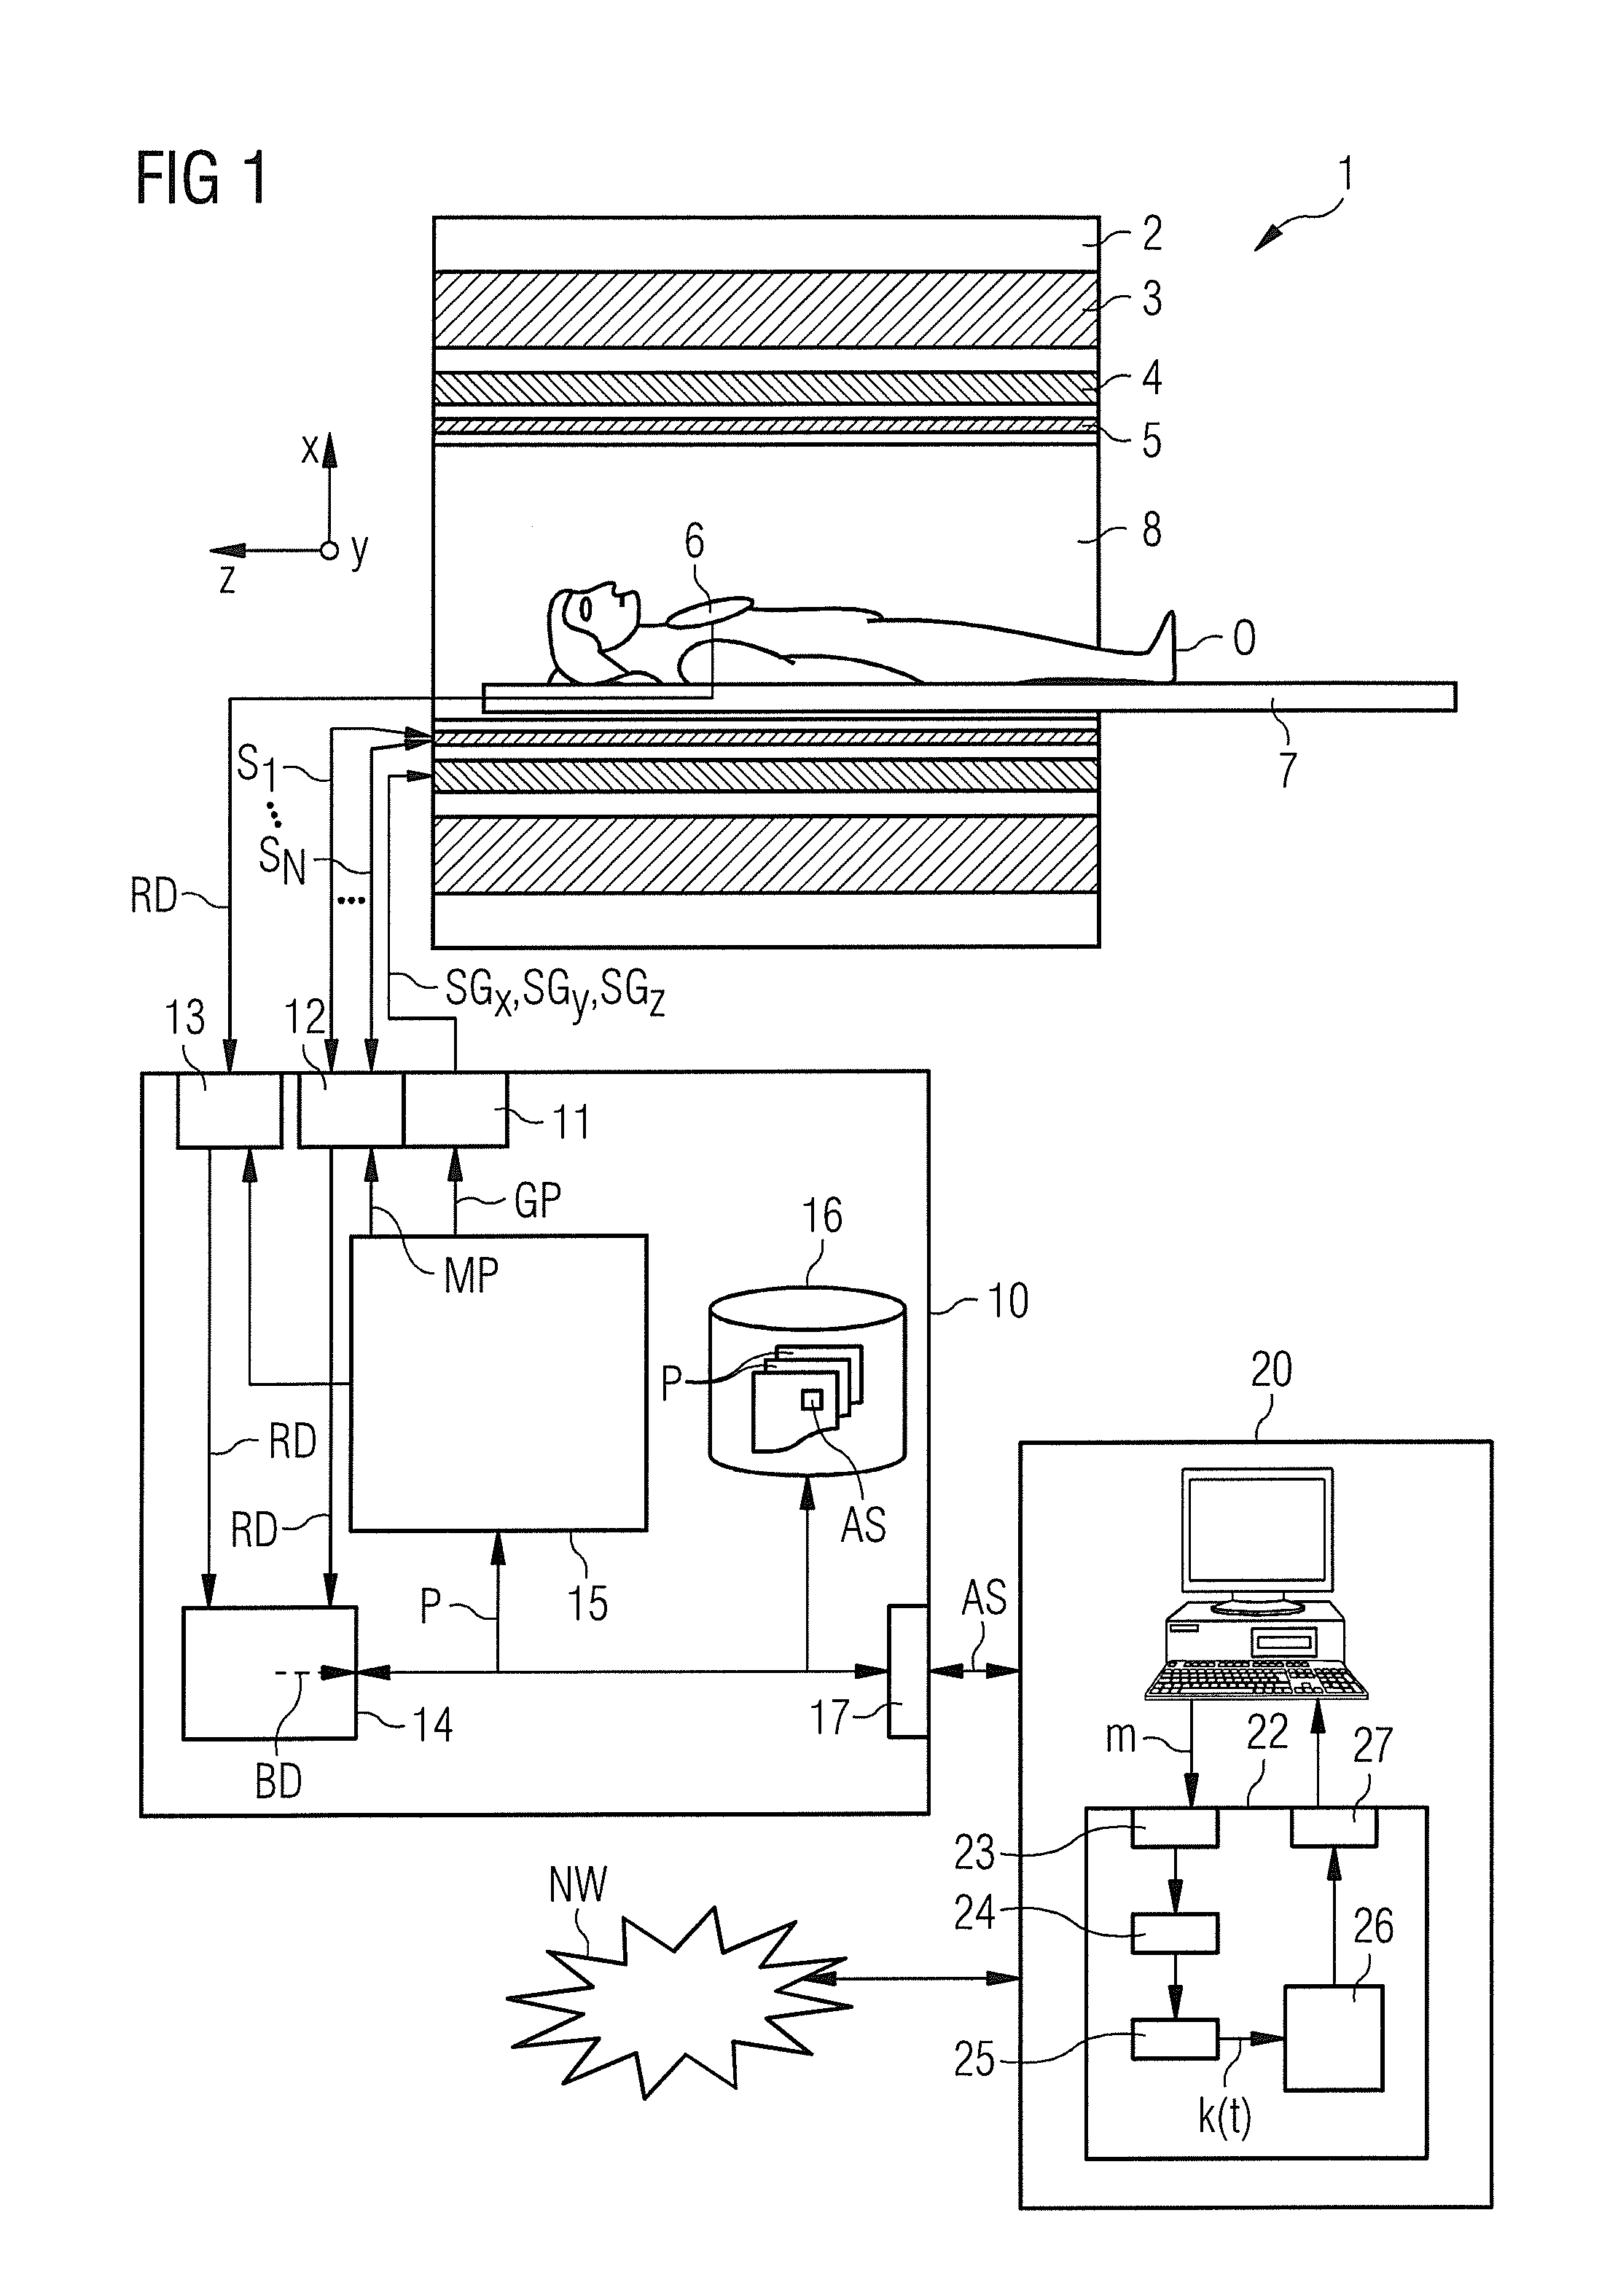 Determination of a magnetic resonance system control sequence